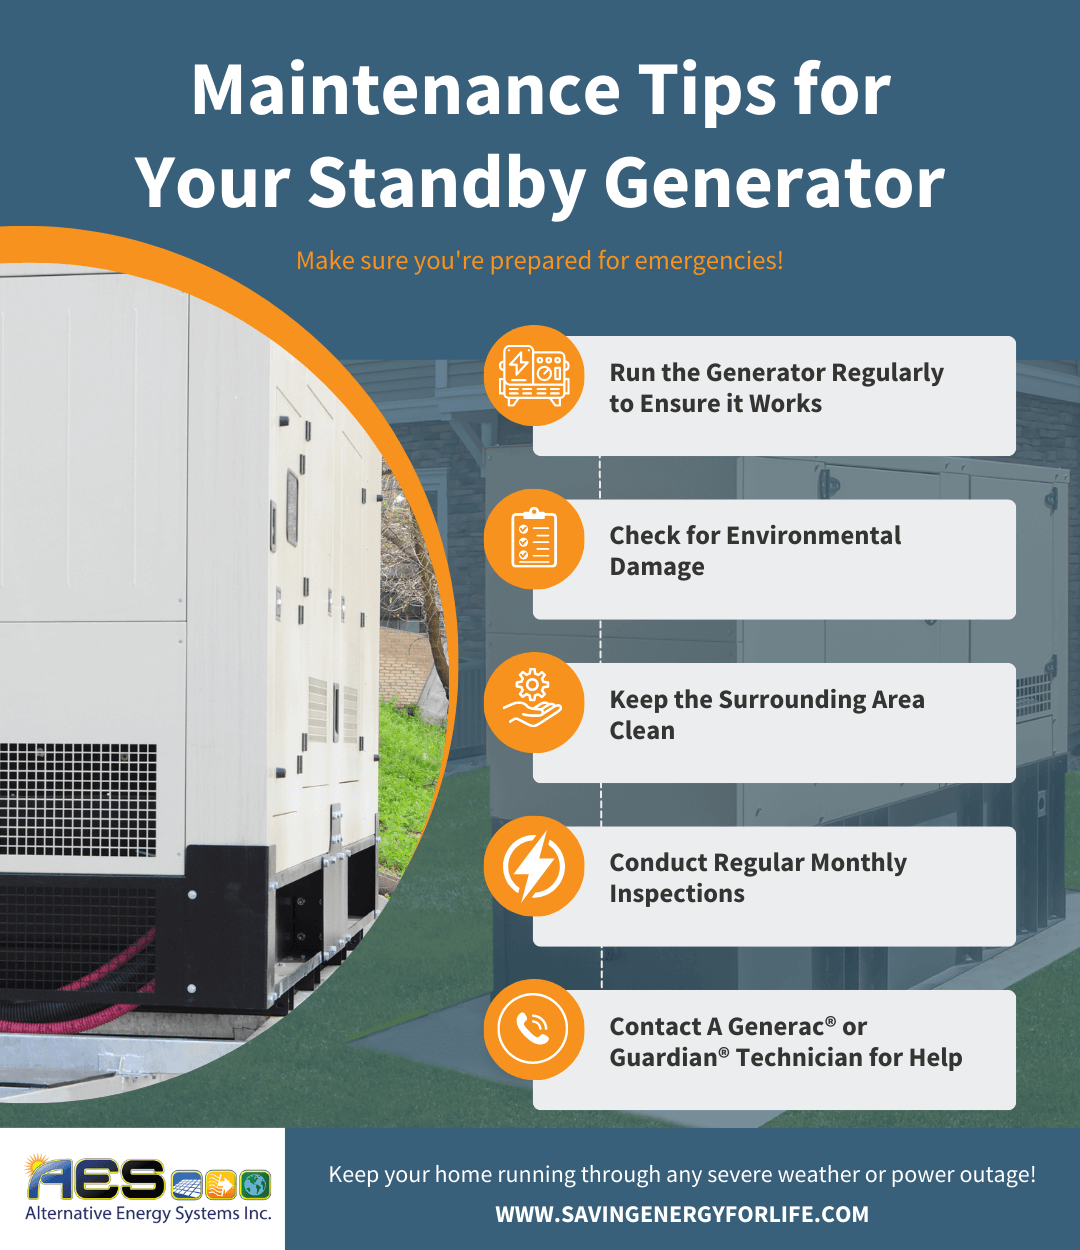 Maintenance Tips for Your Standby Generator infographic